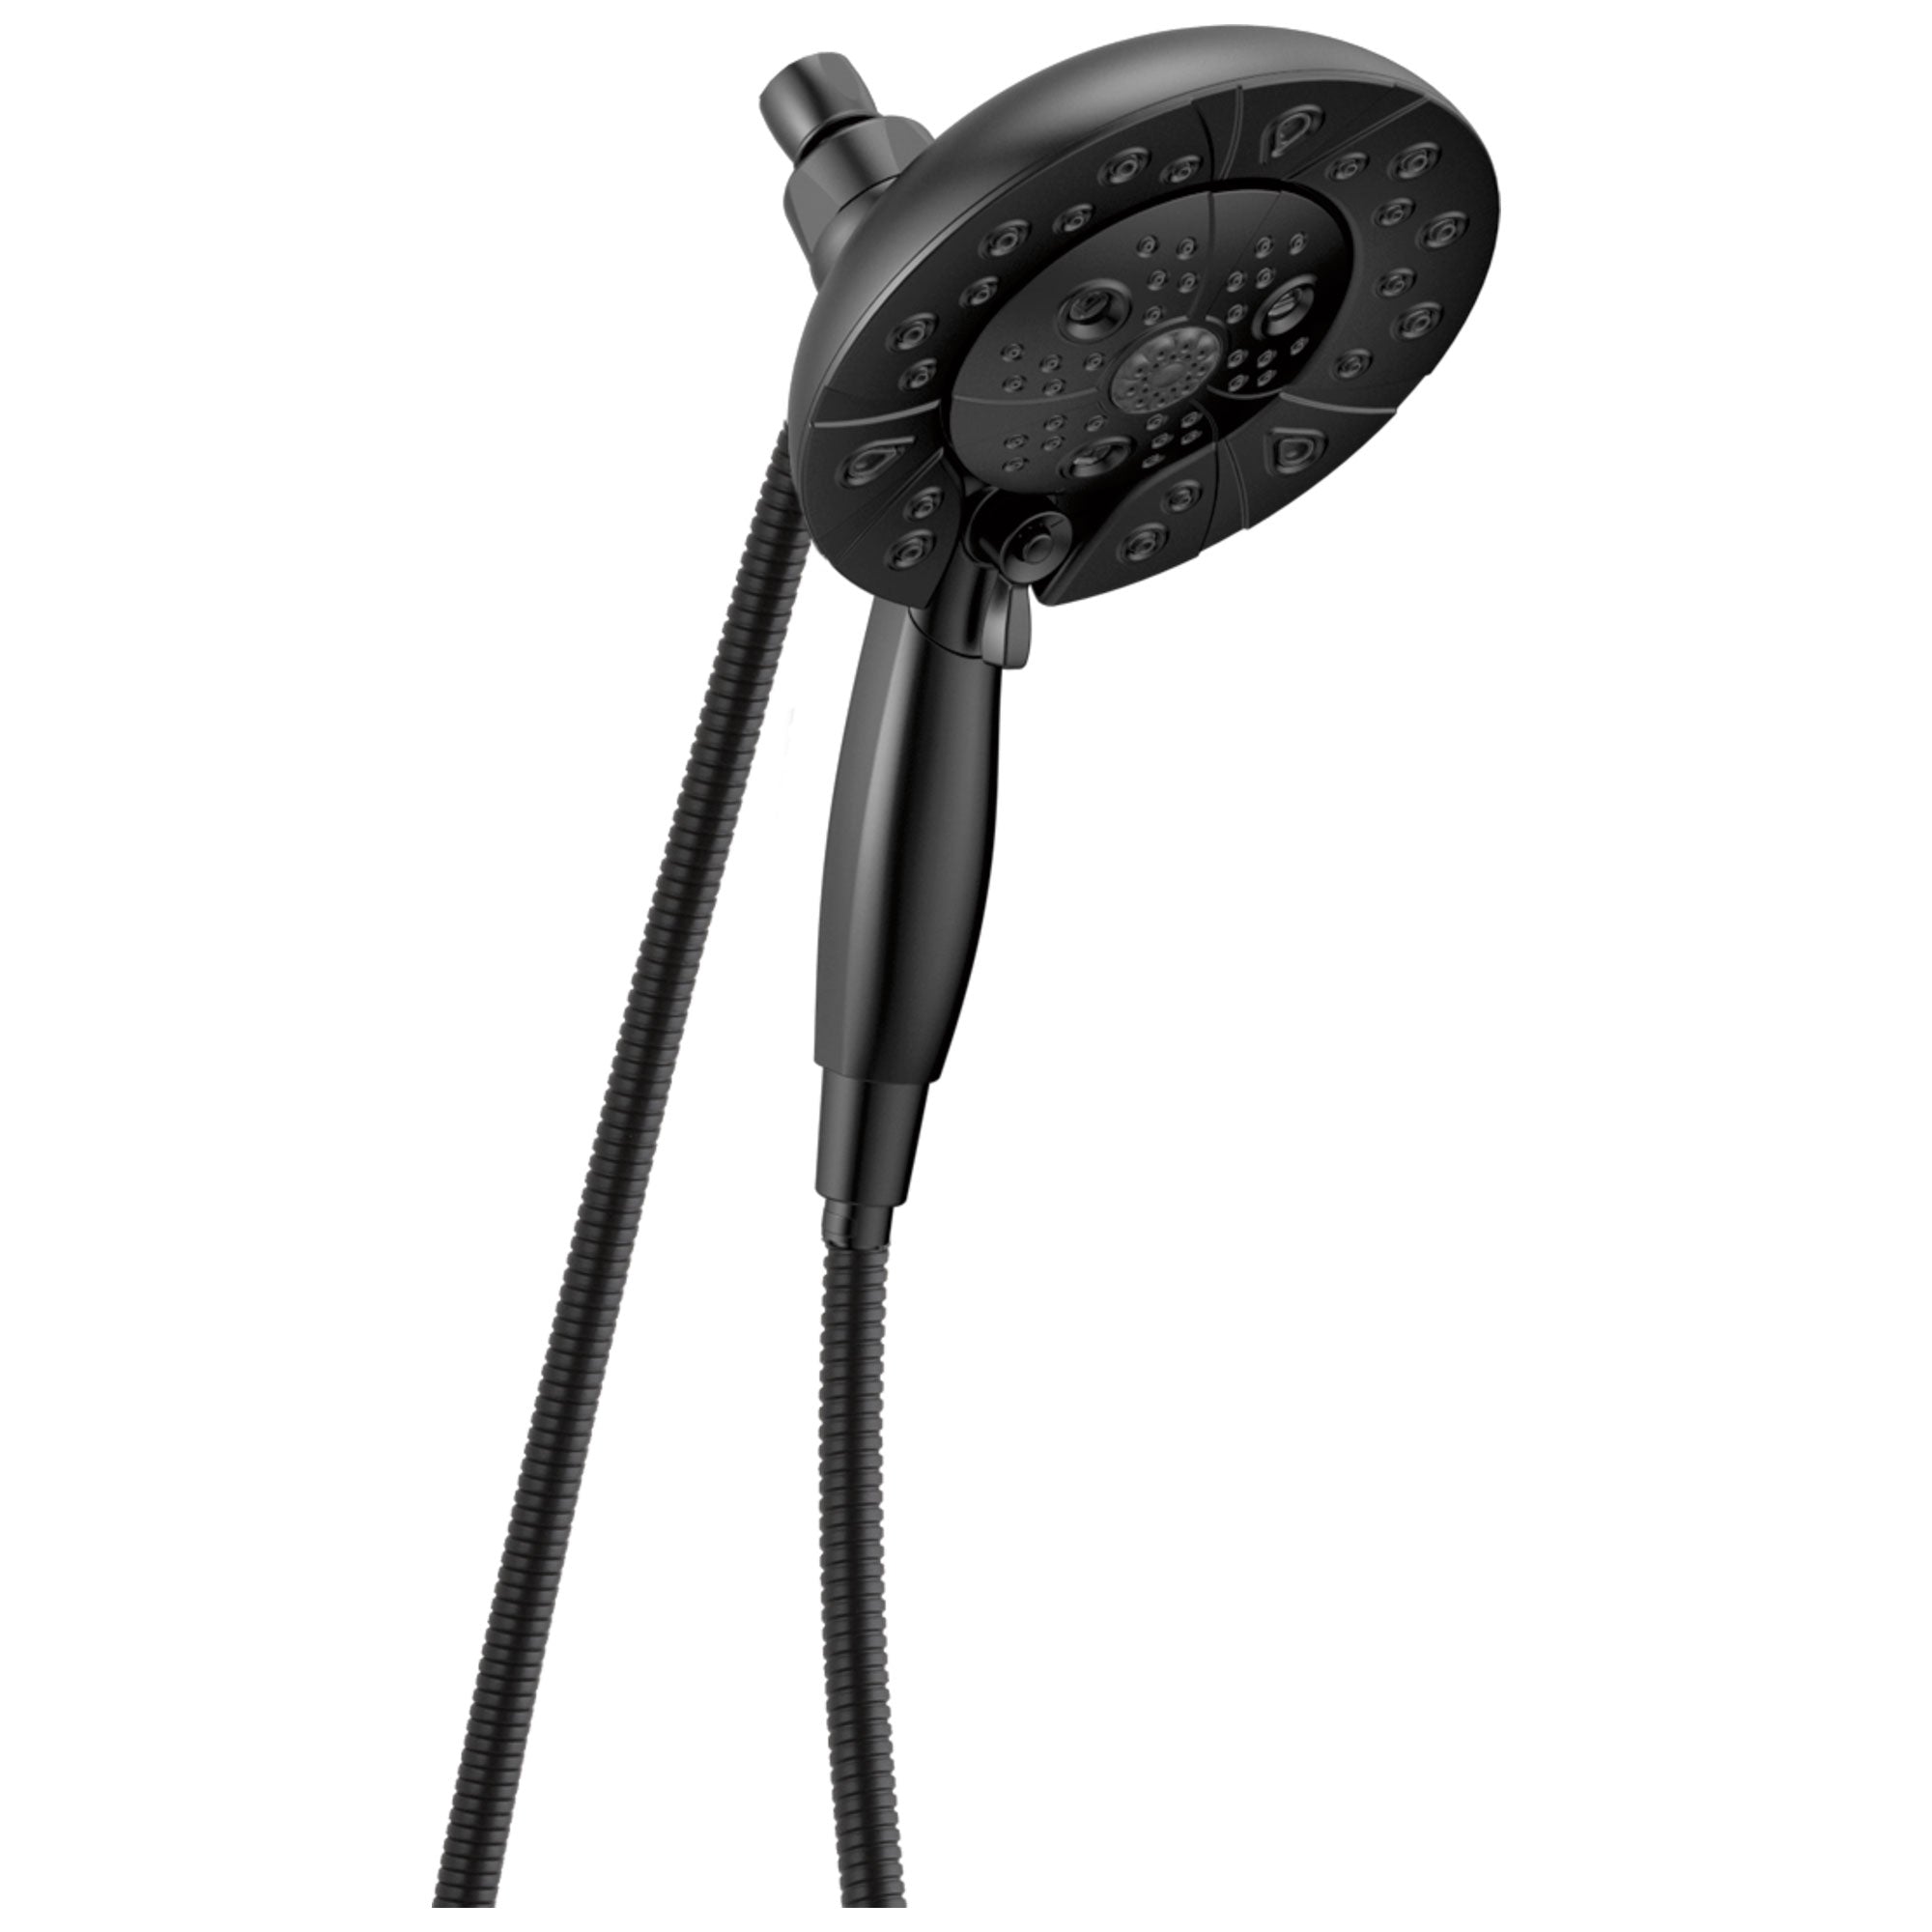 Delta Universal Showering Components Matte Black Finish In2ition 5-Setting Shower Arm Mount 2-in-1 Hand Shower and Showerhead Combination D58480BLPK